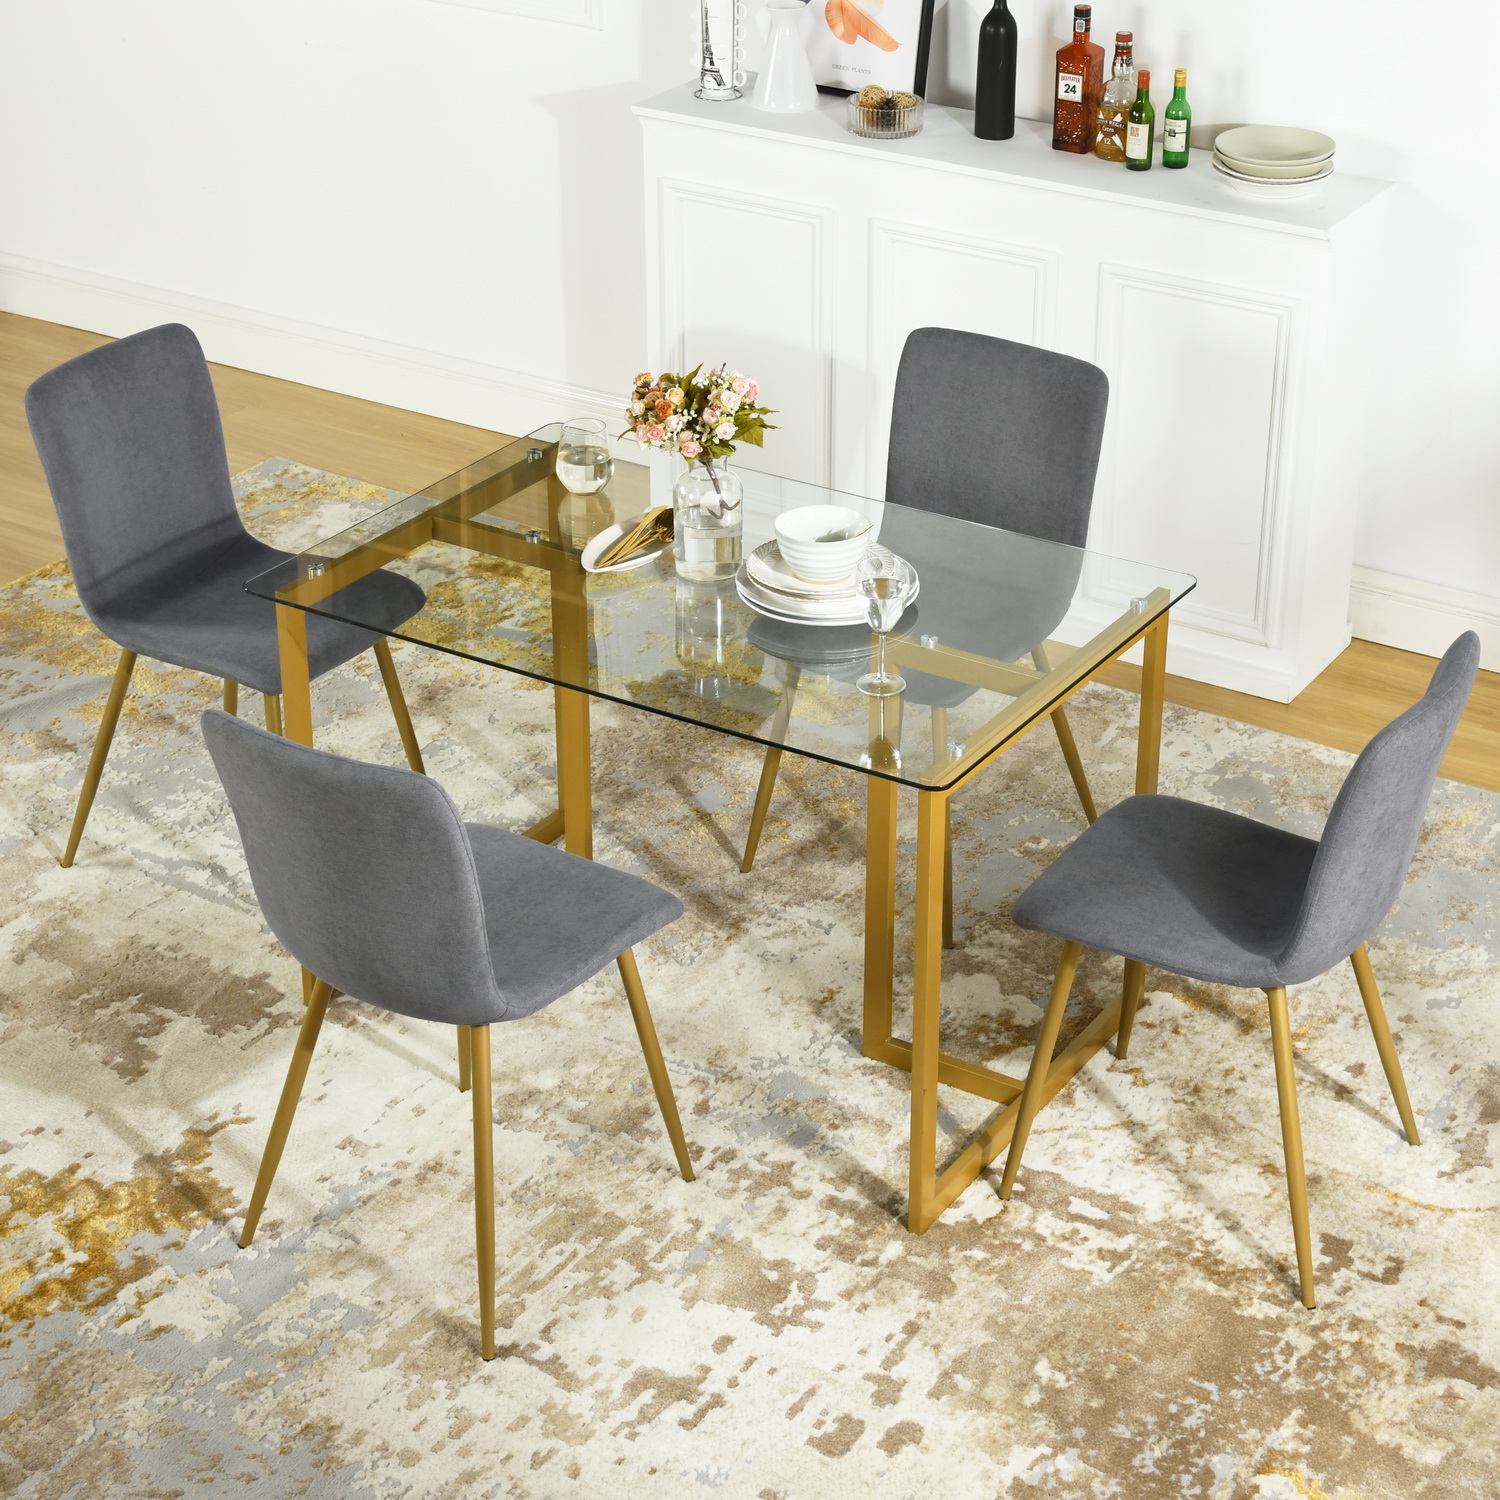 Homy Casa Modern Velvet Dining Chairs Set of 4 - Comfortable Faux Upholstery with Metal Legs, Dark Gray - image 4 of 8